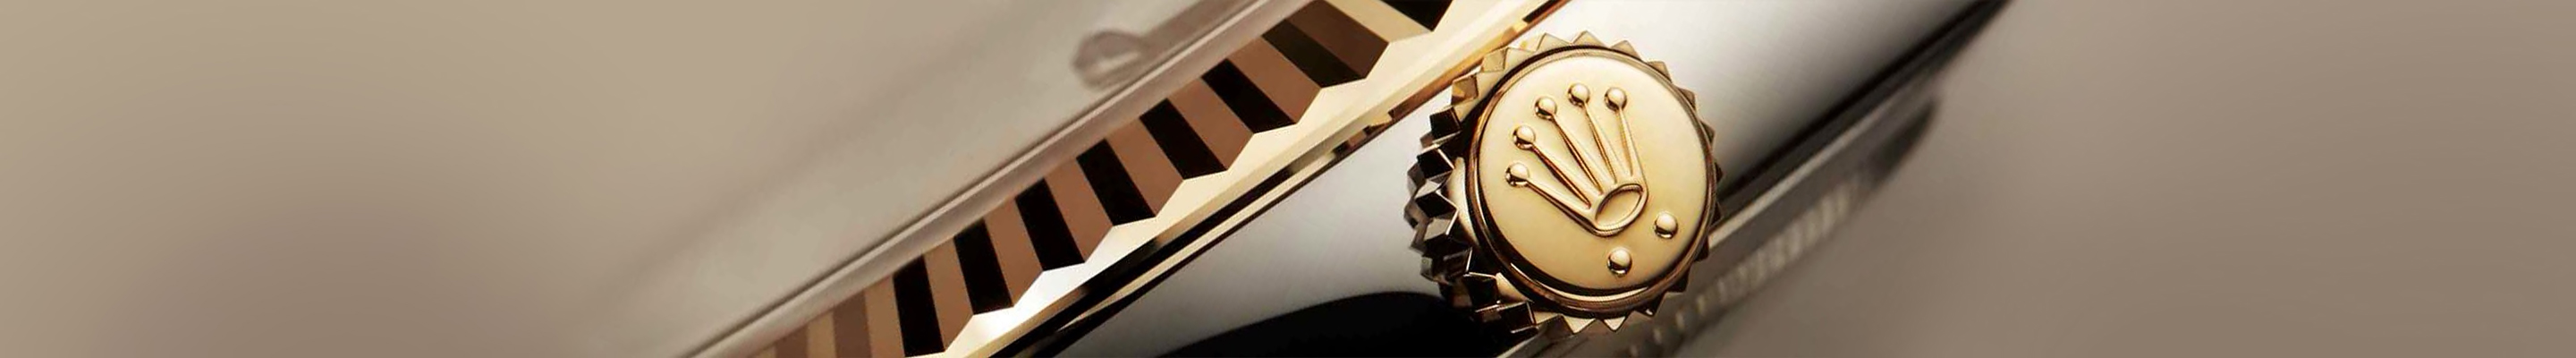 Rolex collection page banner